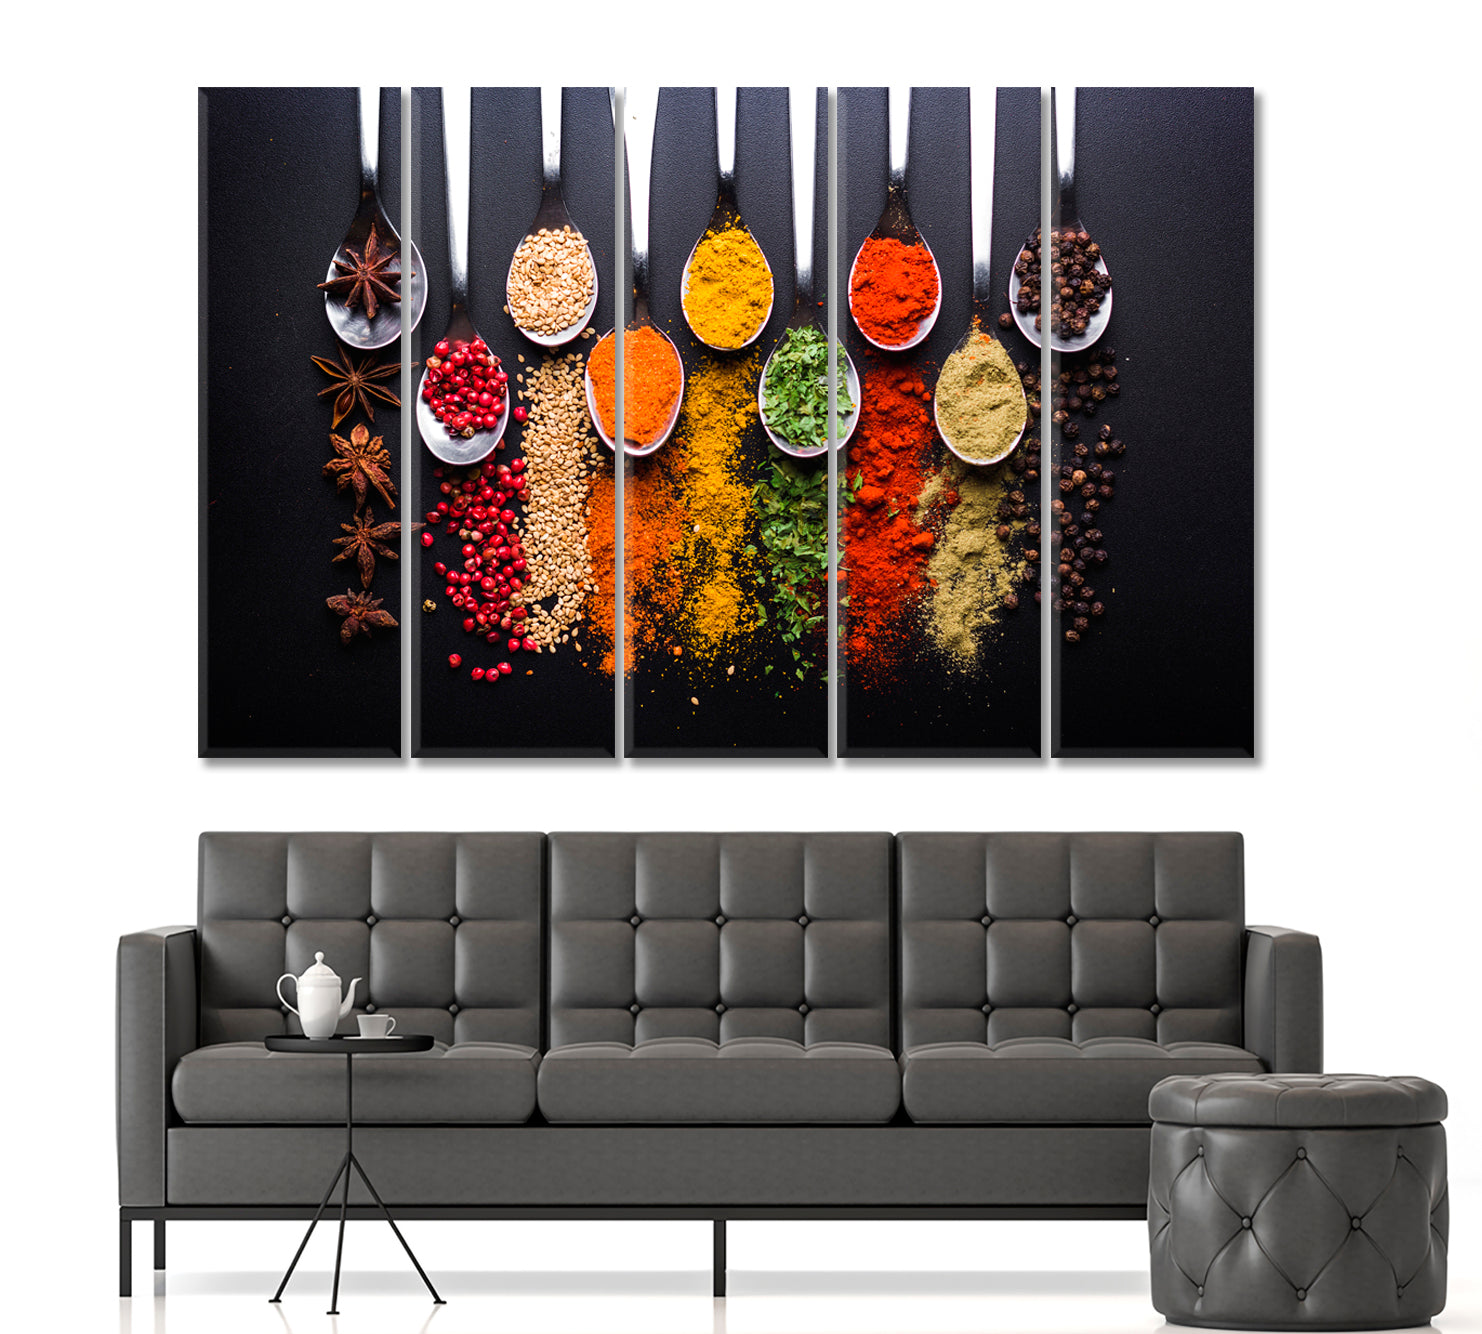 Spices And Condiments Poster Restaurant Modern Wall Art Artesty 5 panels 36" x 24" 